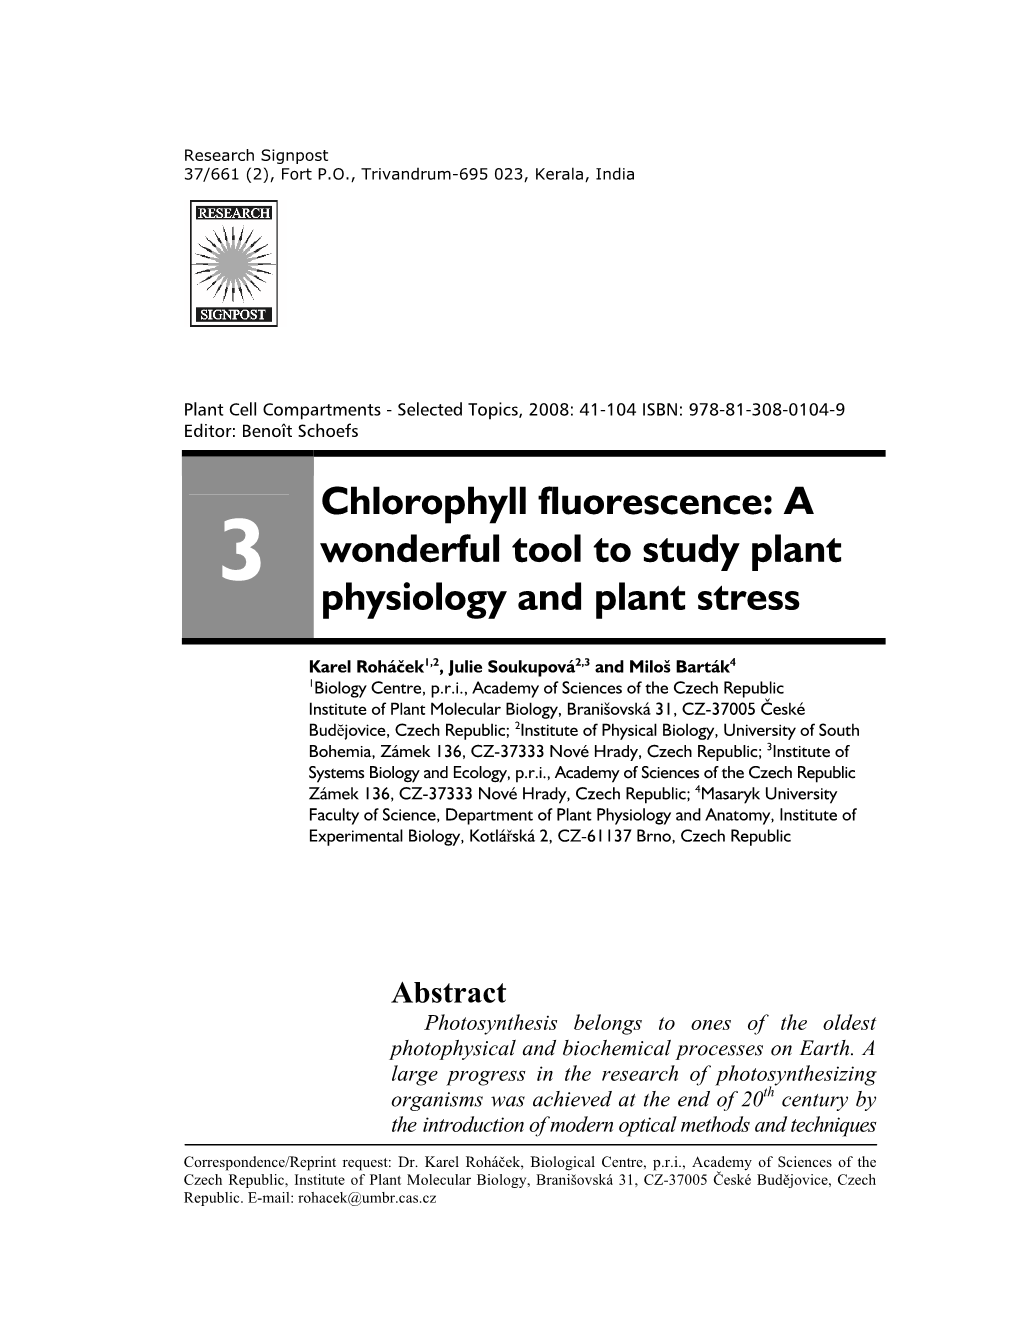 Chlorophyll Fluorescence: a Wonderful Tool to Study Plant Physiology And